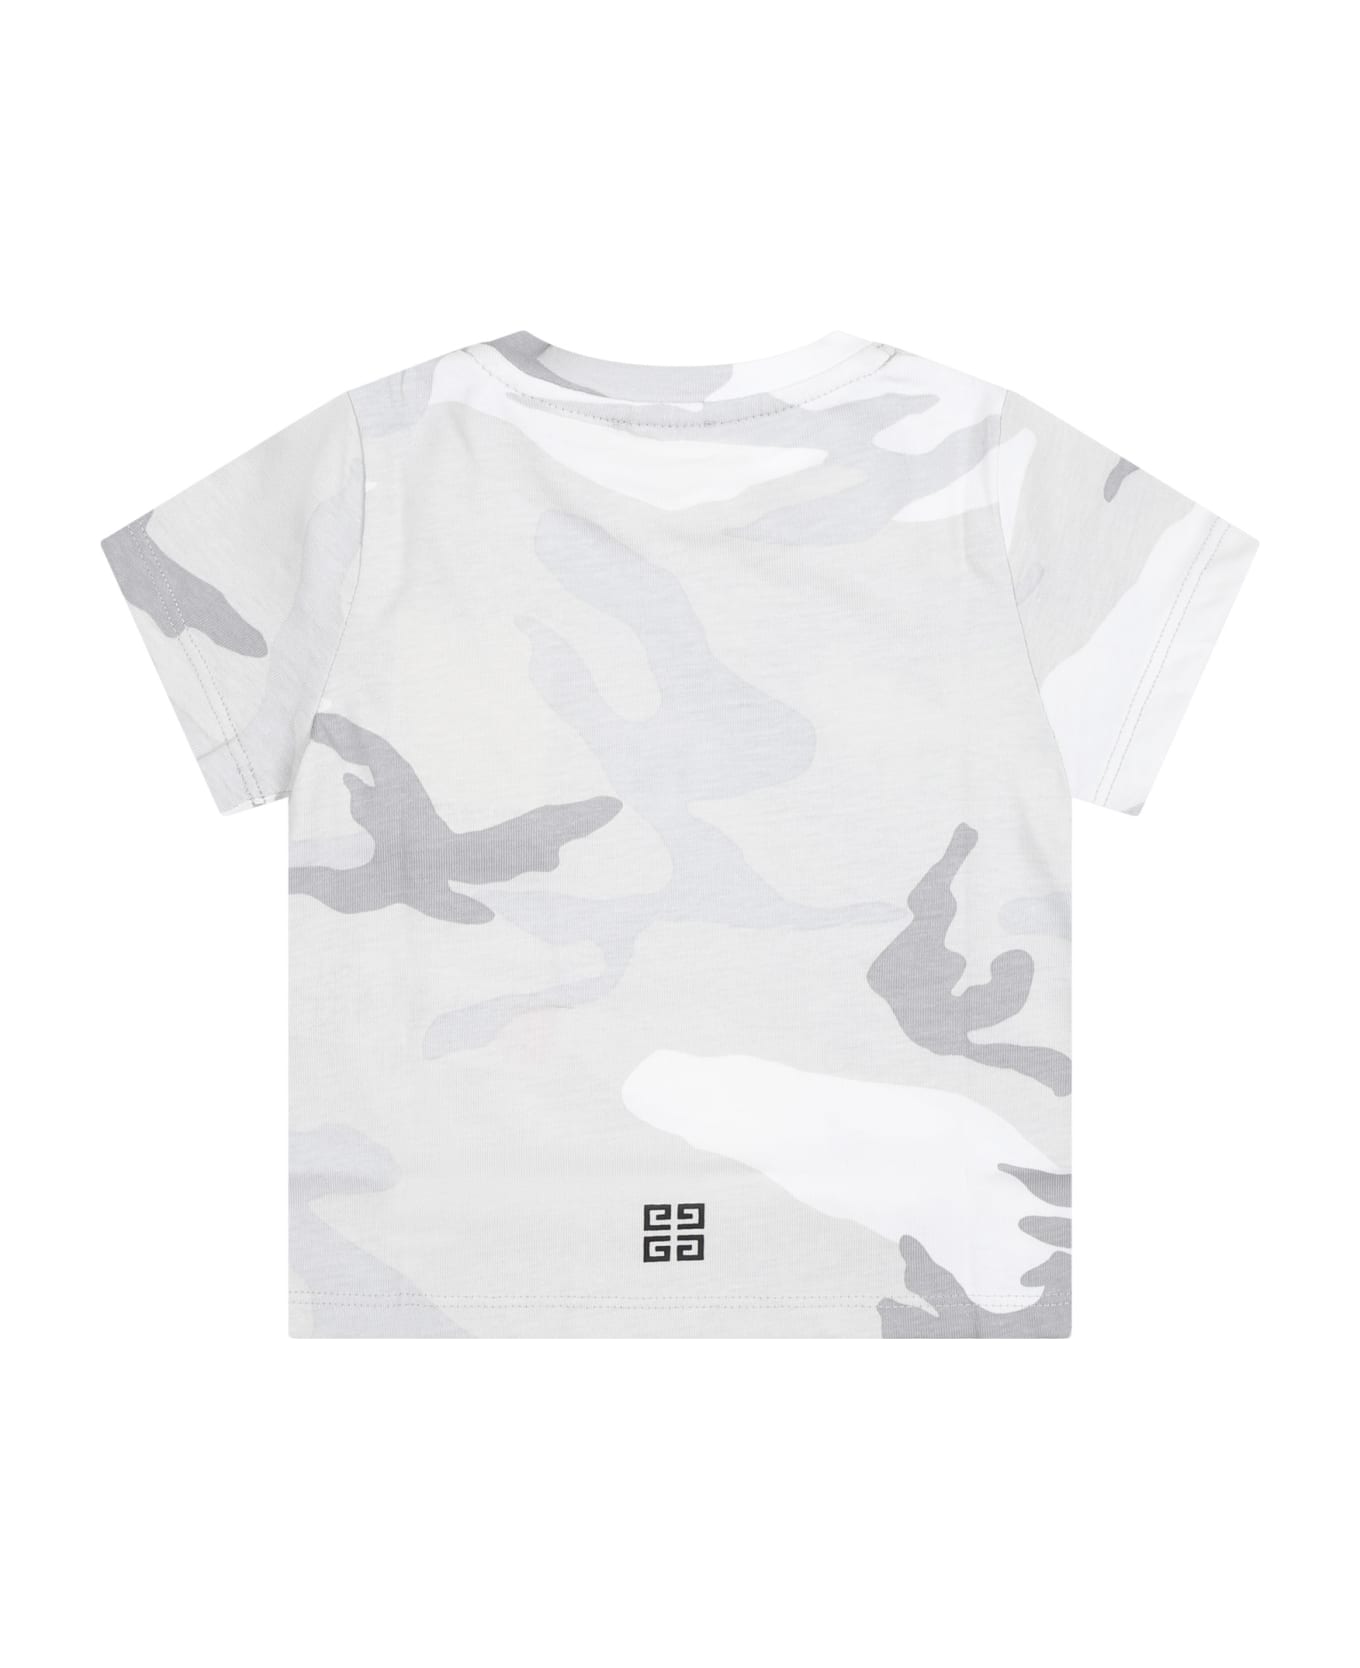 Givenchy Gray T-shirt For Baby Boy With Camouflage Print - Grey